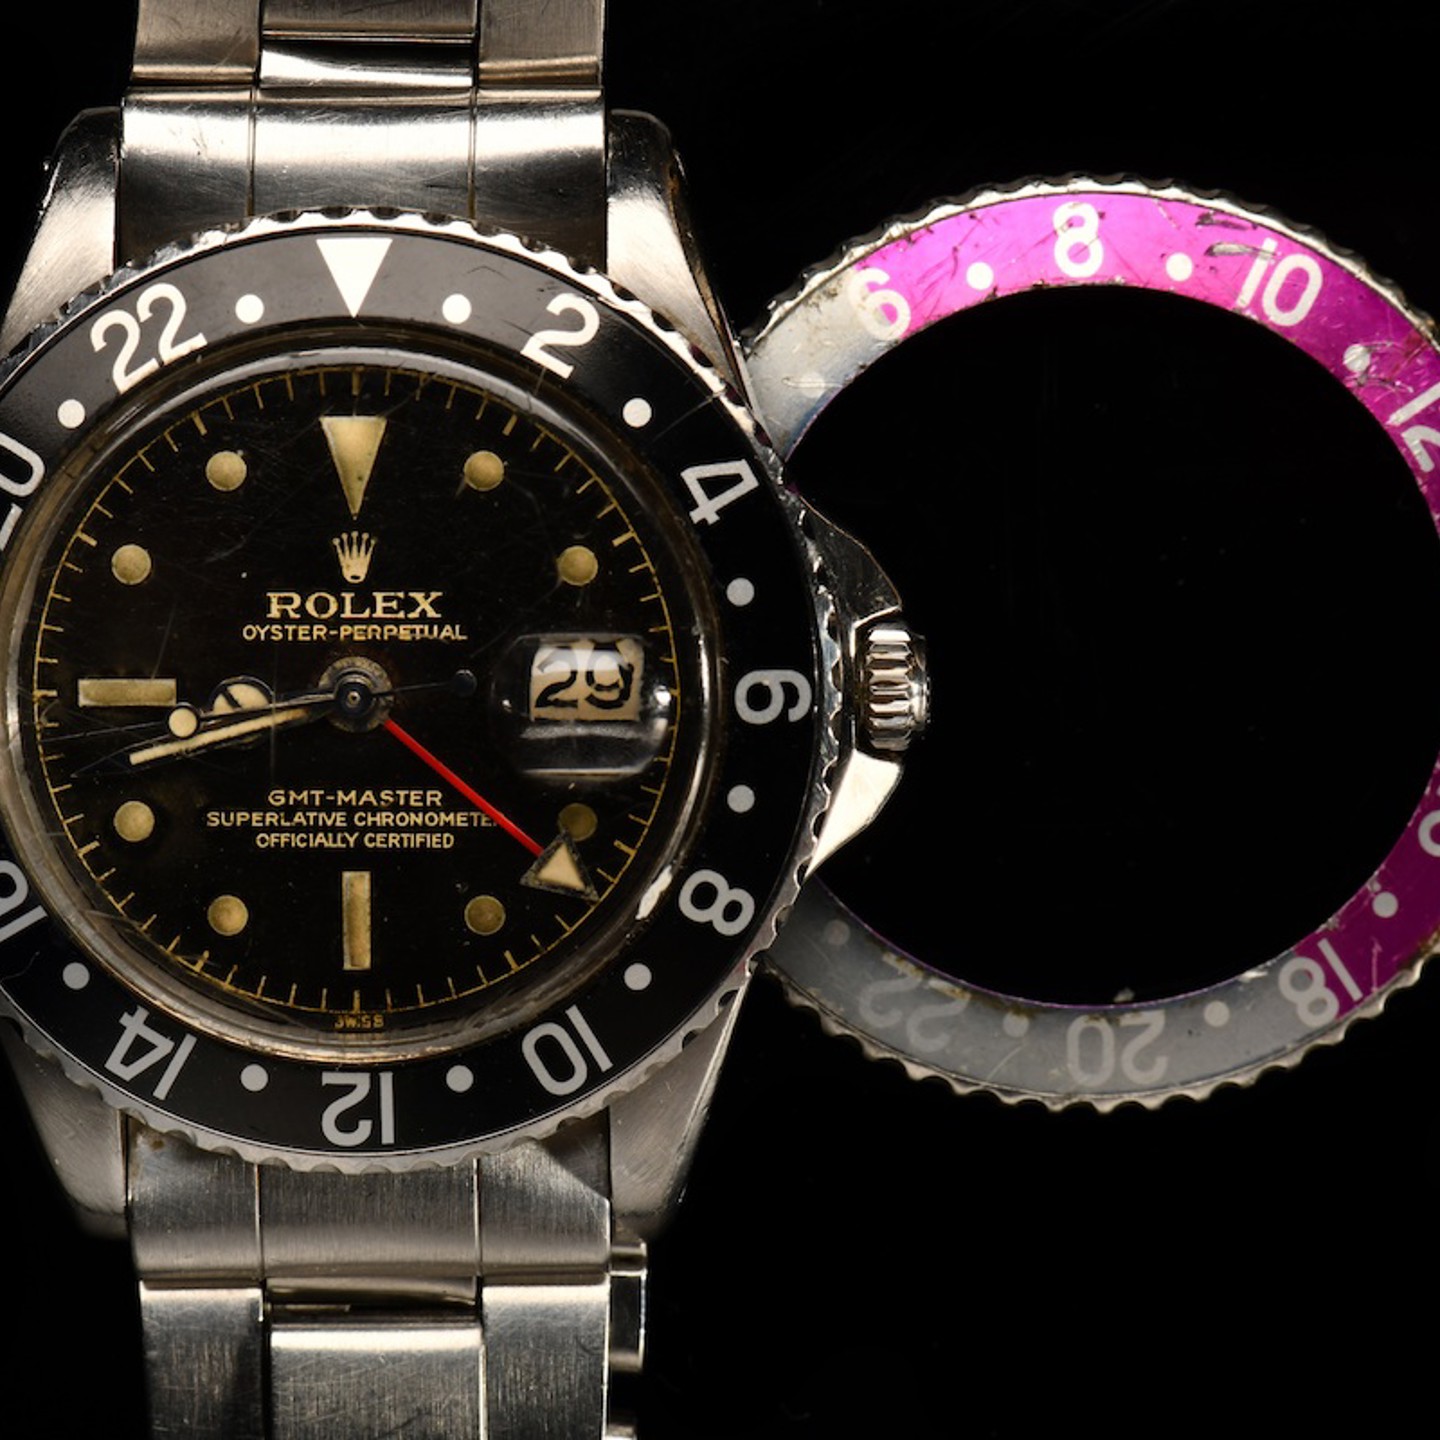 Rolex Oyster Perpetual GMT Master Wristwatch, Sold For £19,400